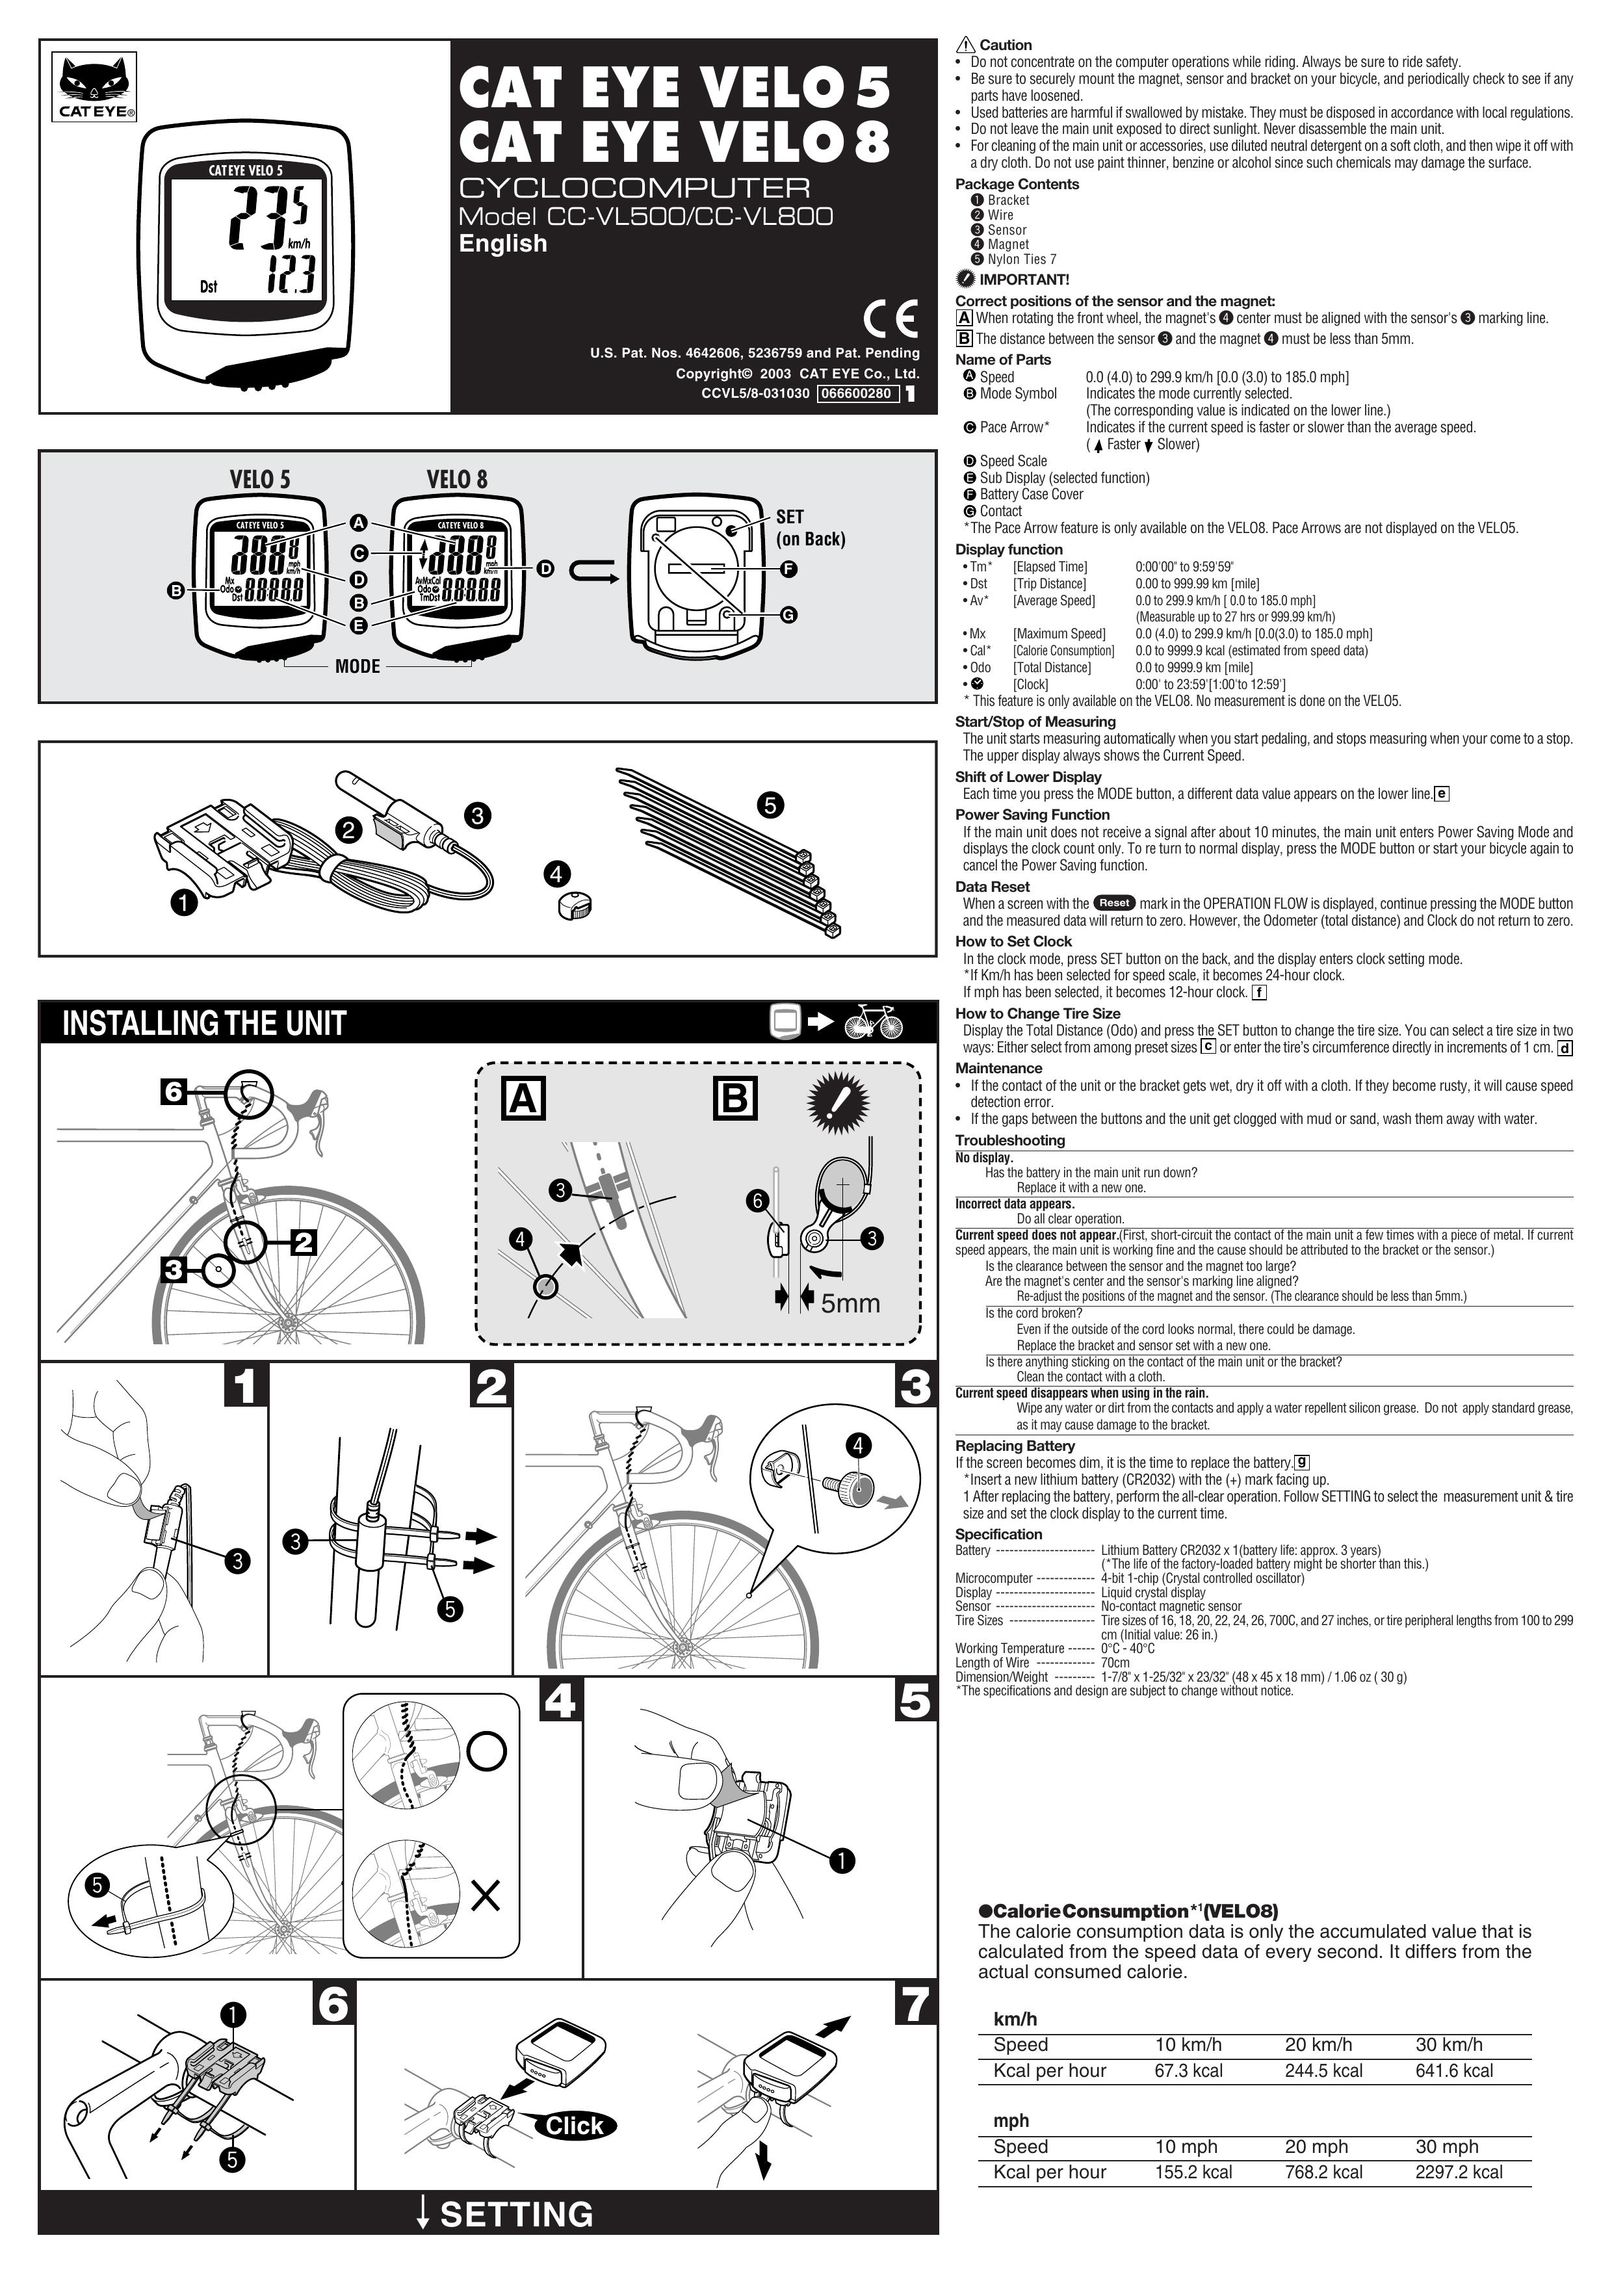 Cateye CC-VL500 Bicycle Accessories User Manual (Page 1)